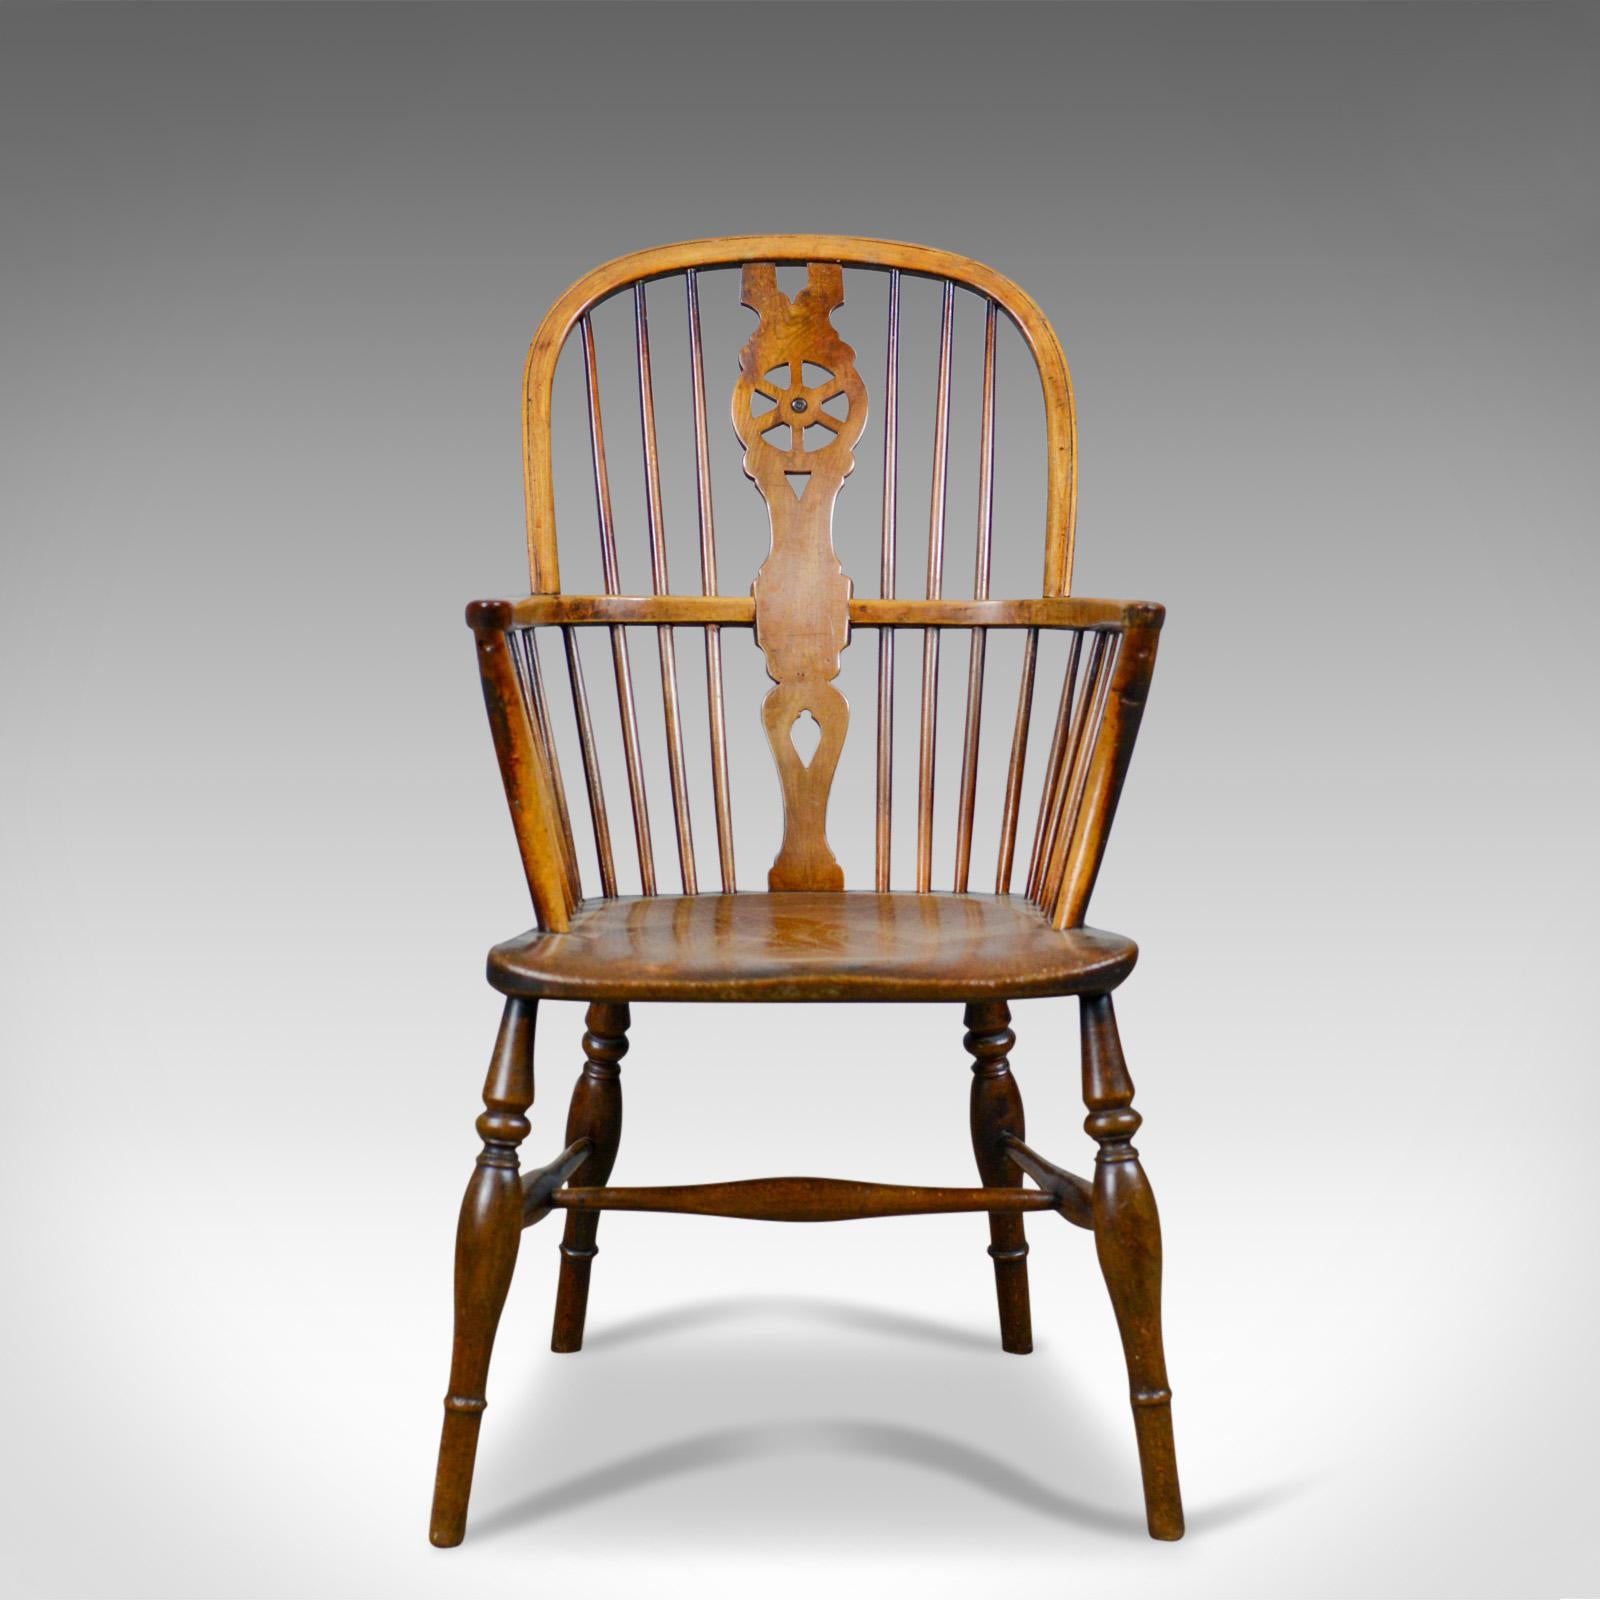 This is an antique Windsor armchair, an English Victorian, country kitchen, stick back elbow chair in elm, beech and ash dating to circa 1900.

Stunning chair in fine order throughout
Classic pierced back splat above and below the arm bow
Raked,